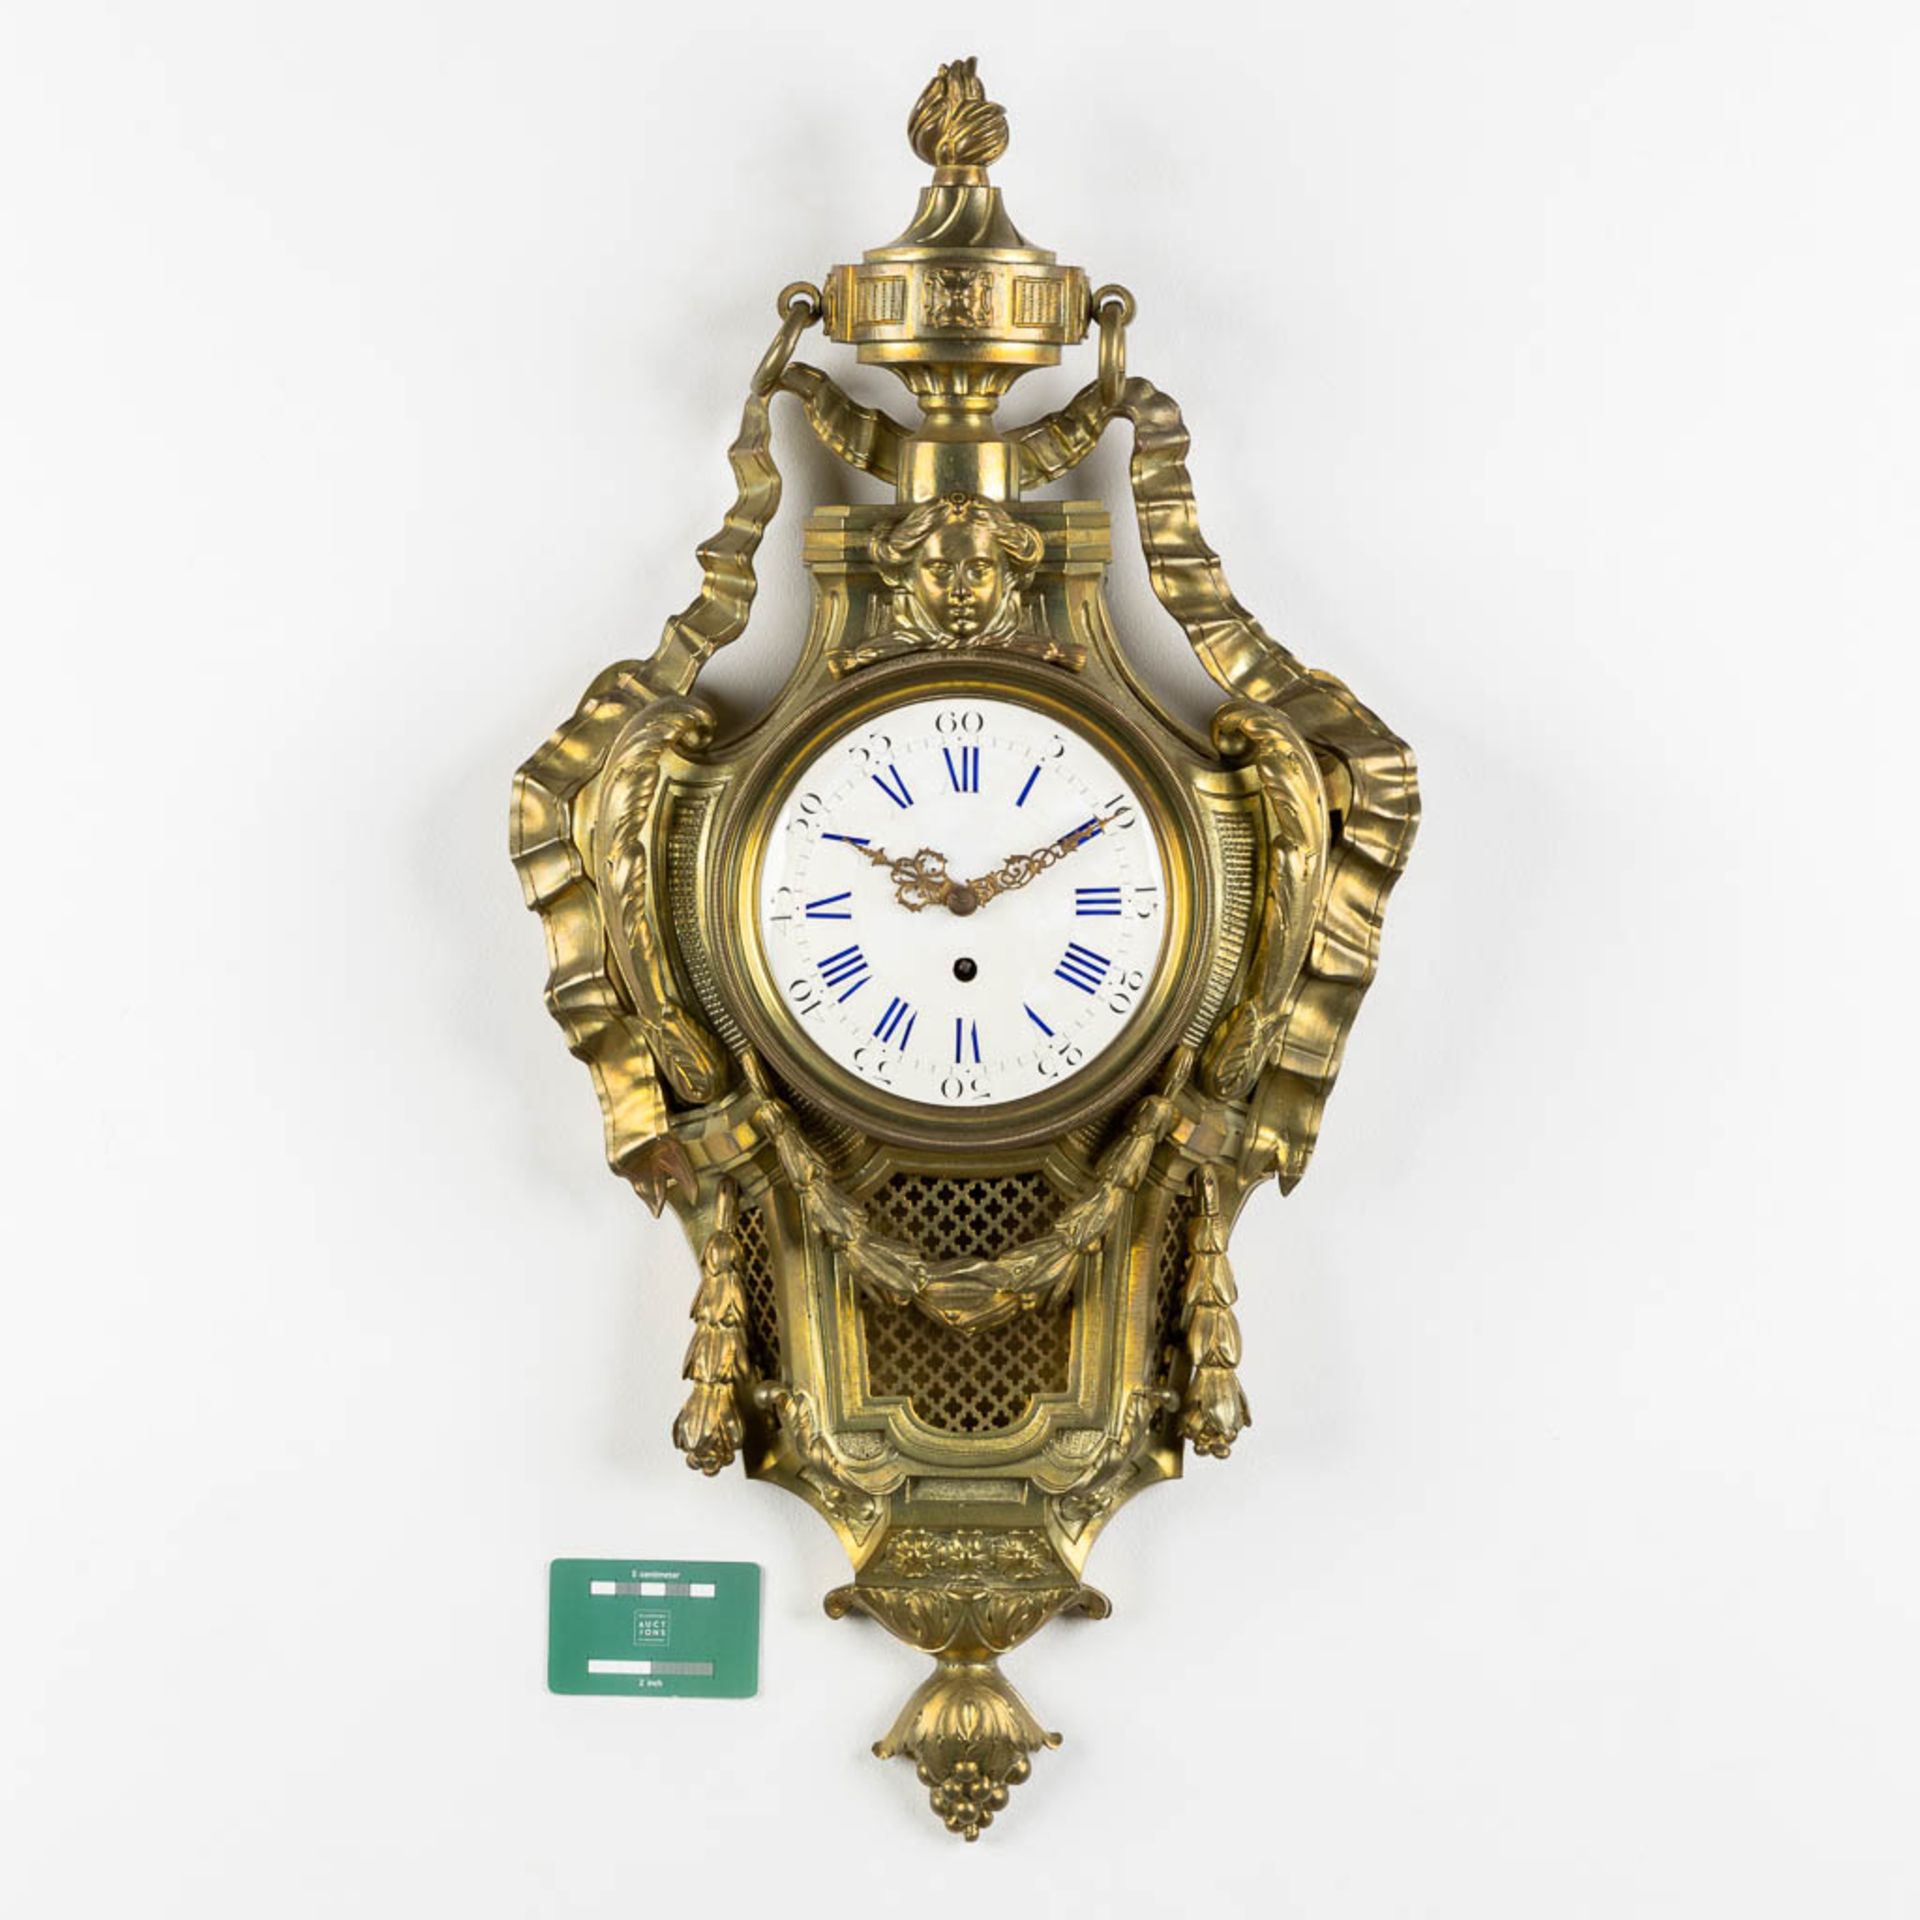 A wall-mounted bronze cartel clock, Louis XVI style. 19th C. (L:12 x W:37 x H:71 cm) - Image 2 of 7